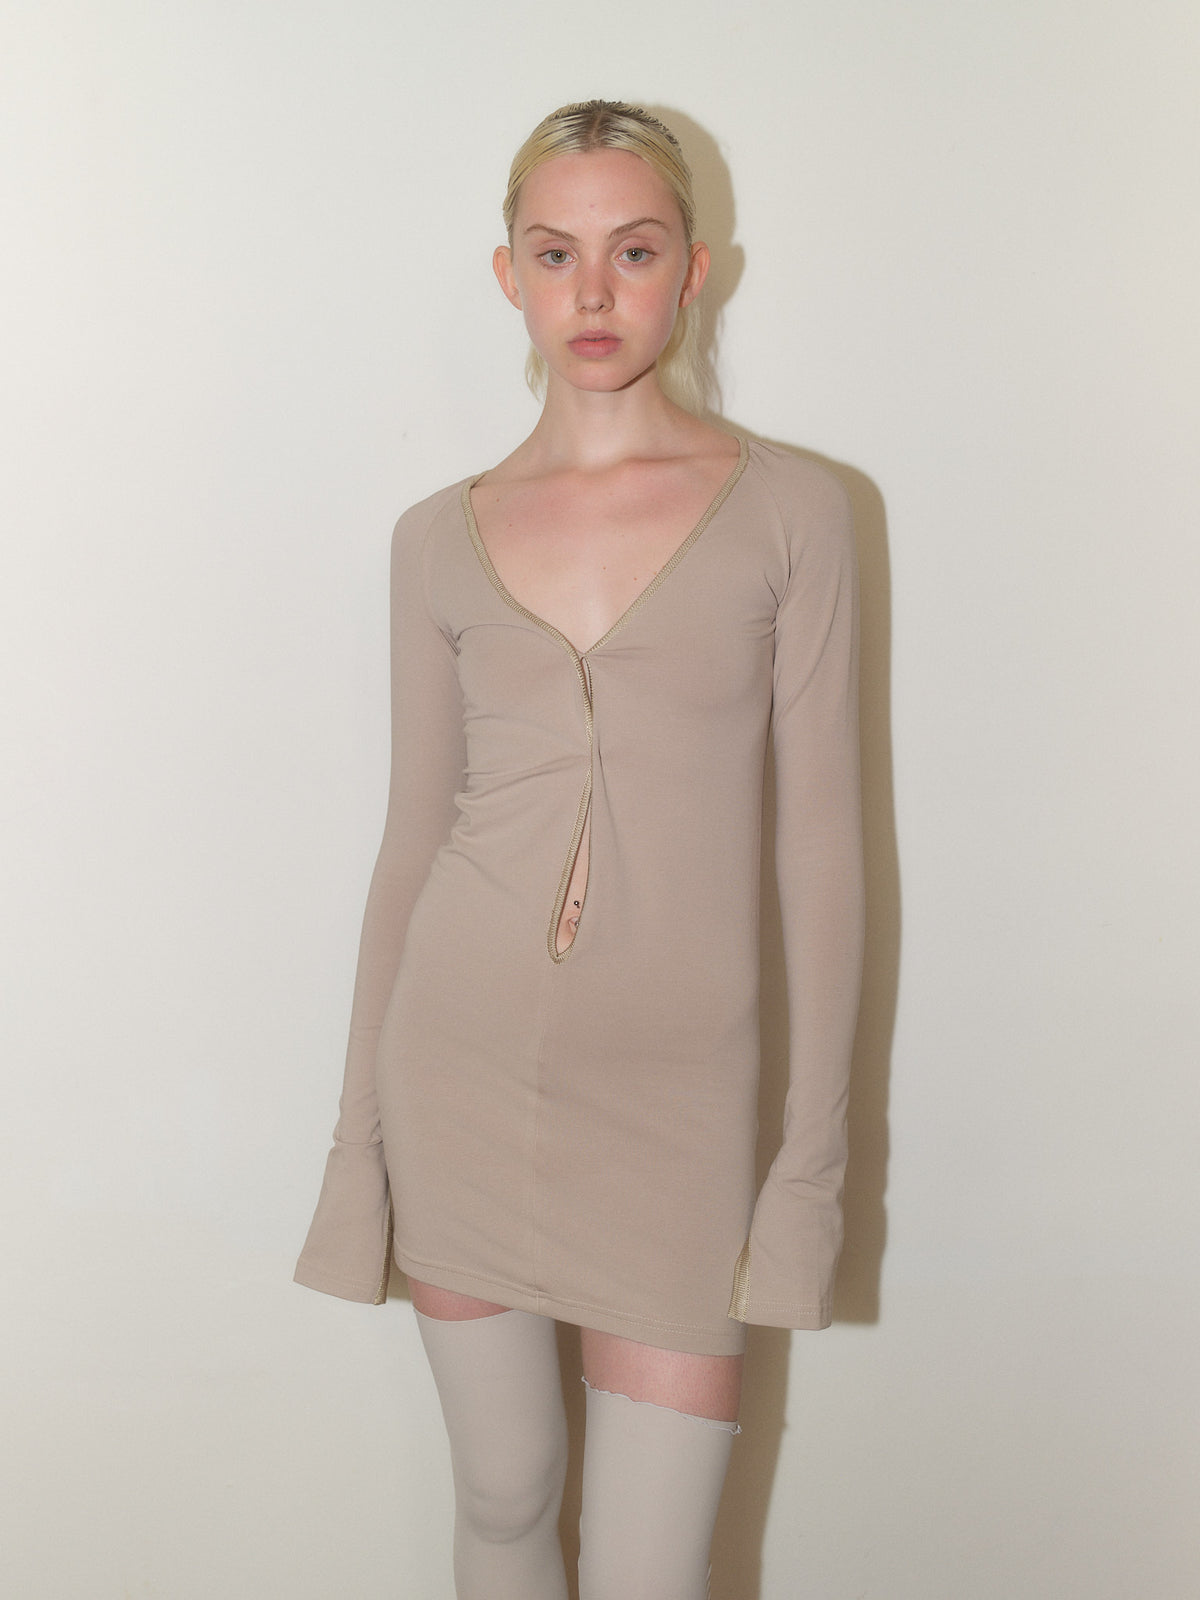 Cotton Jersey Dress designed by Christina Seewald. Sustainable, designed and made in Europe.